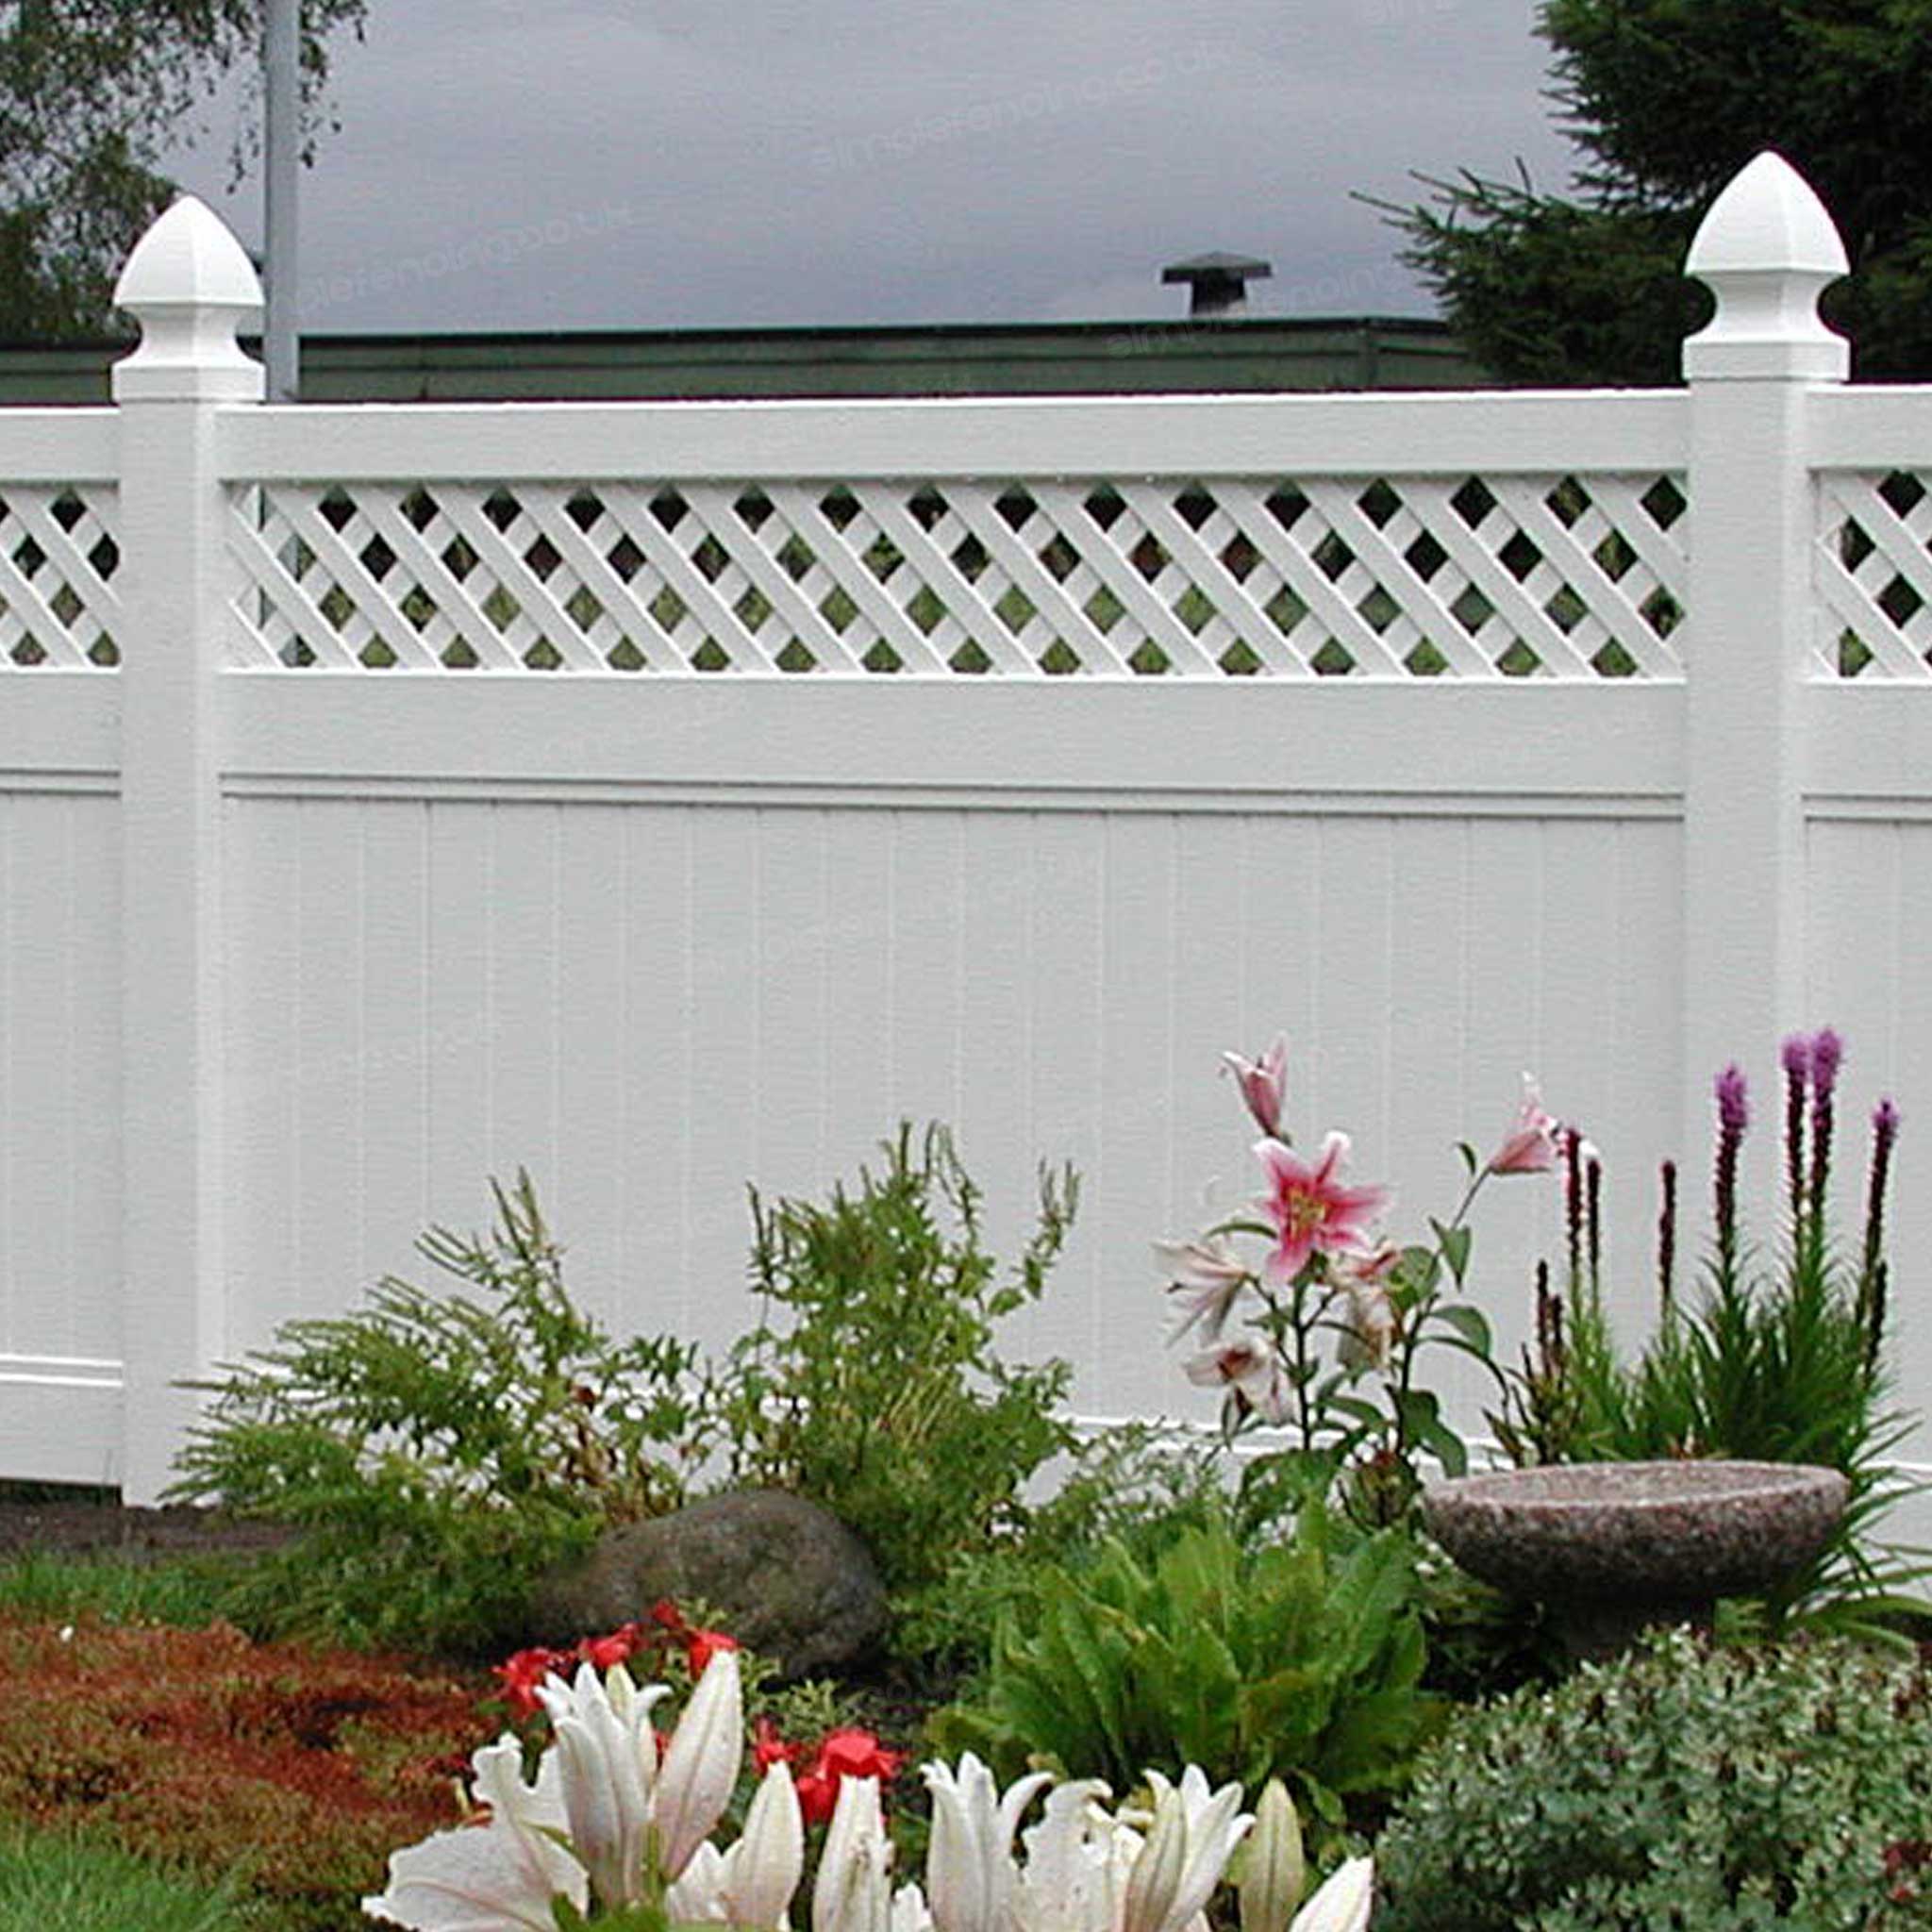 Cascade 8 ft. W x 6 ft. H White Vinyl Privacy Fence Panel with Lattice Simple Fencing